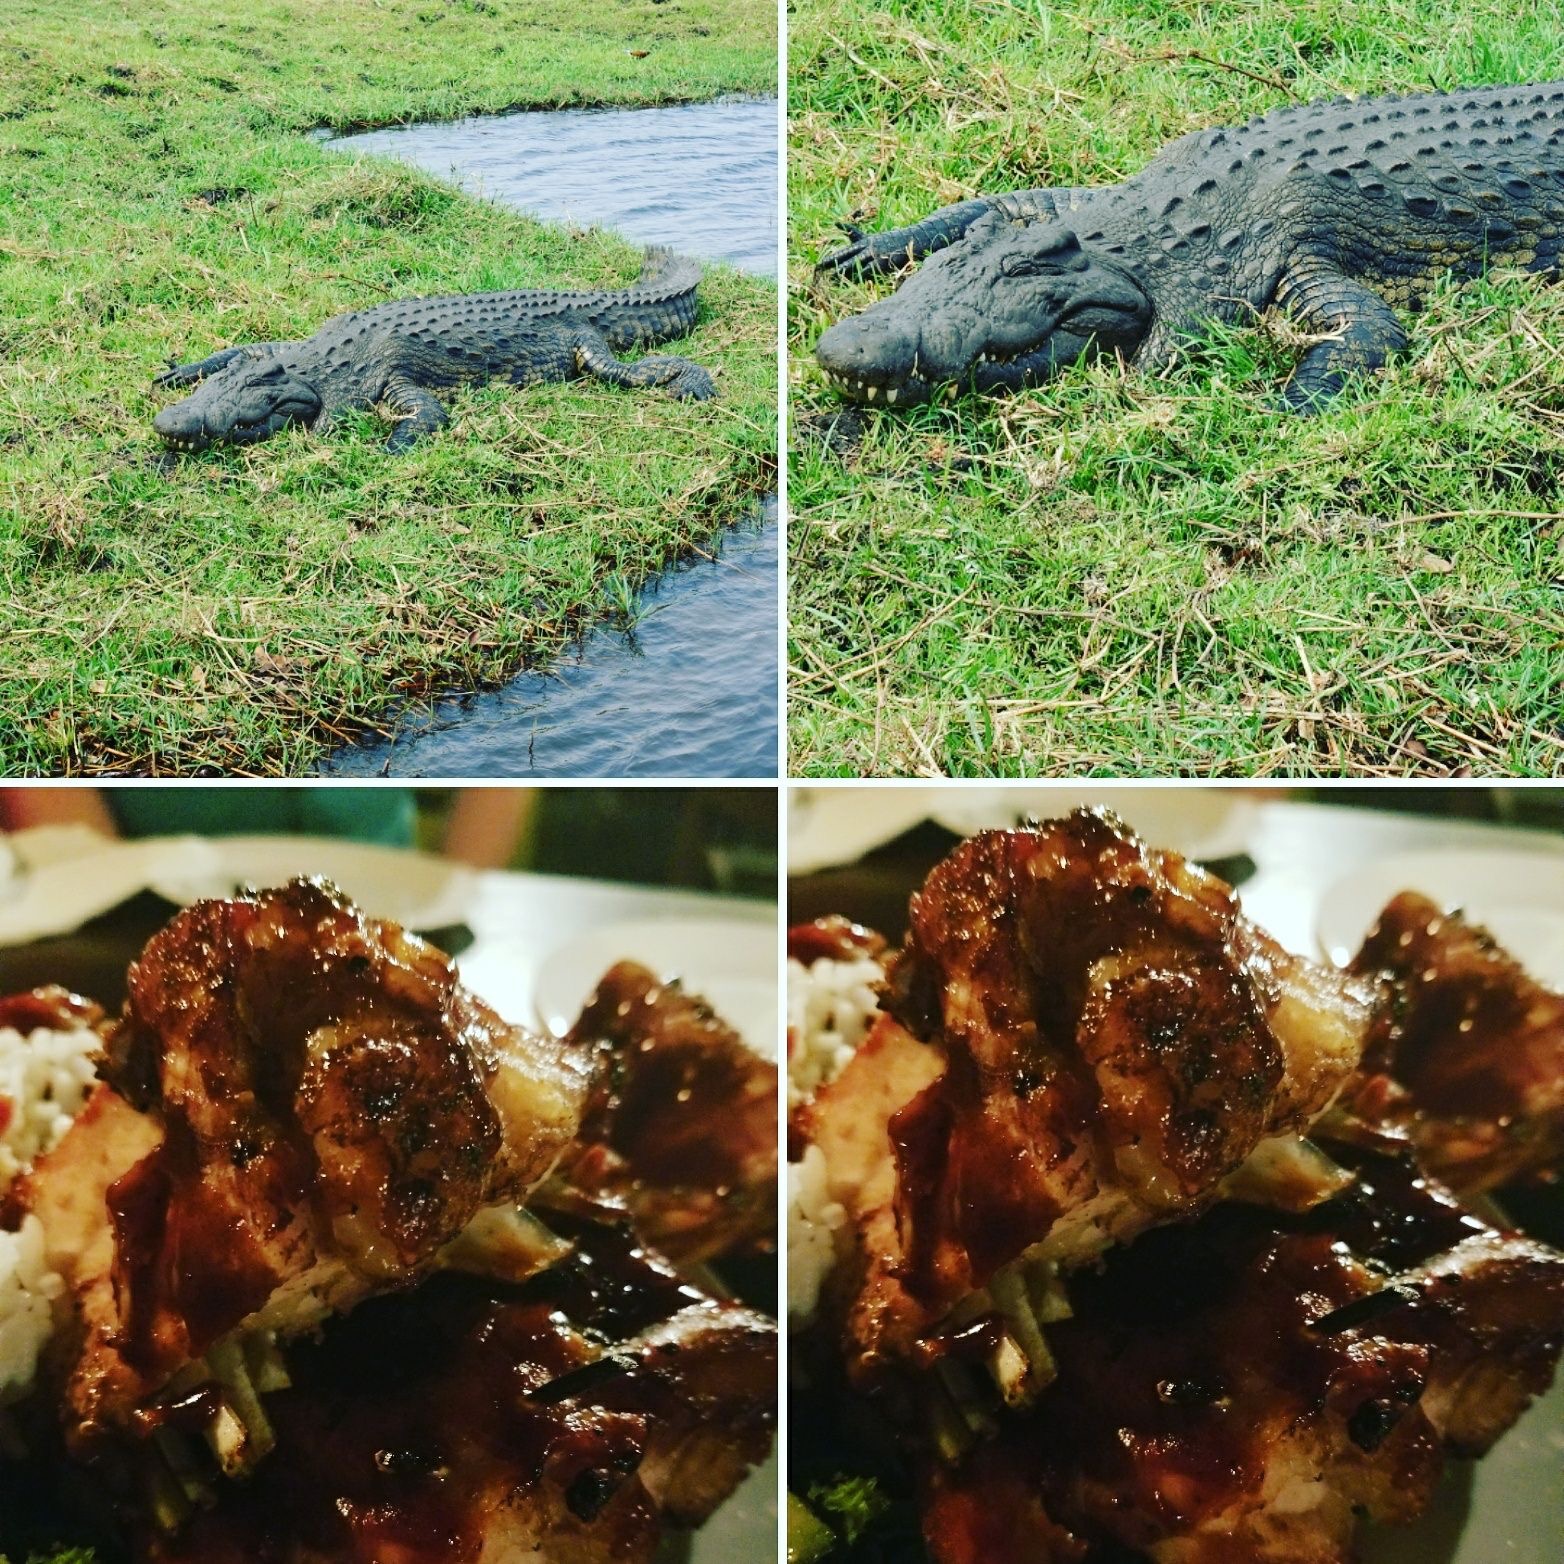 a crocodile lying on grass next to a plate of food